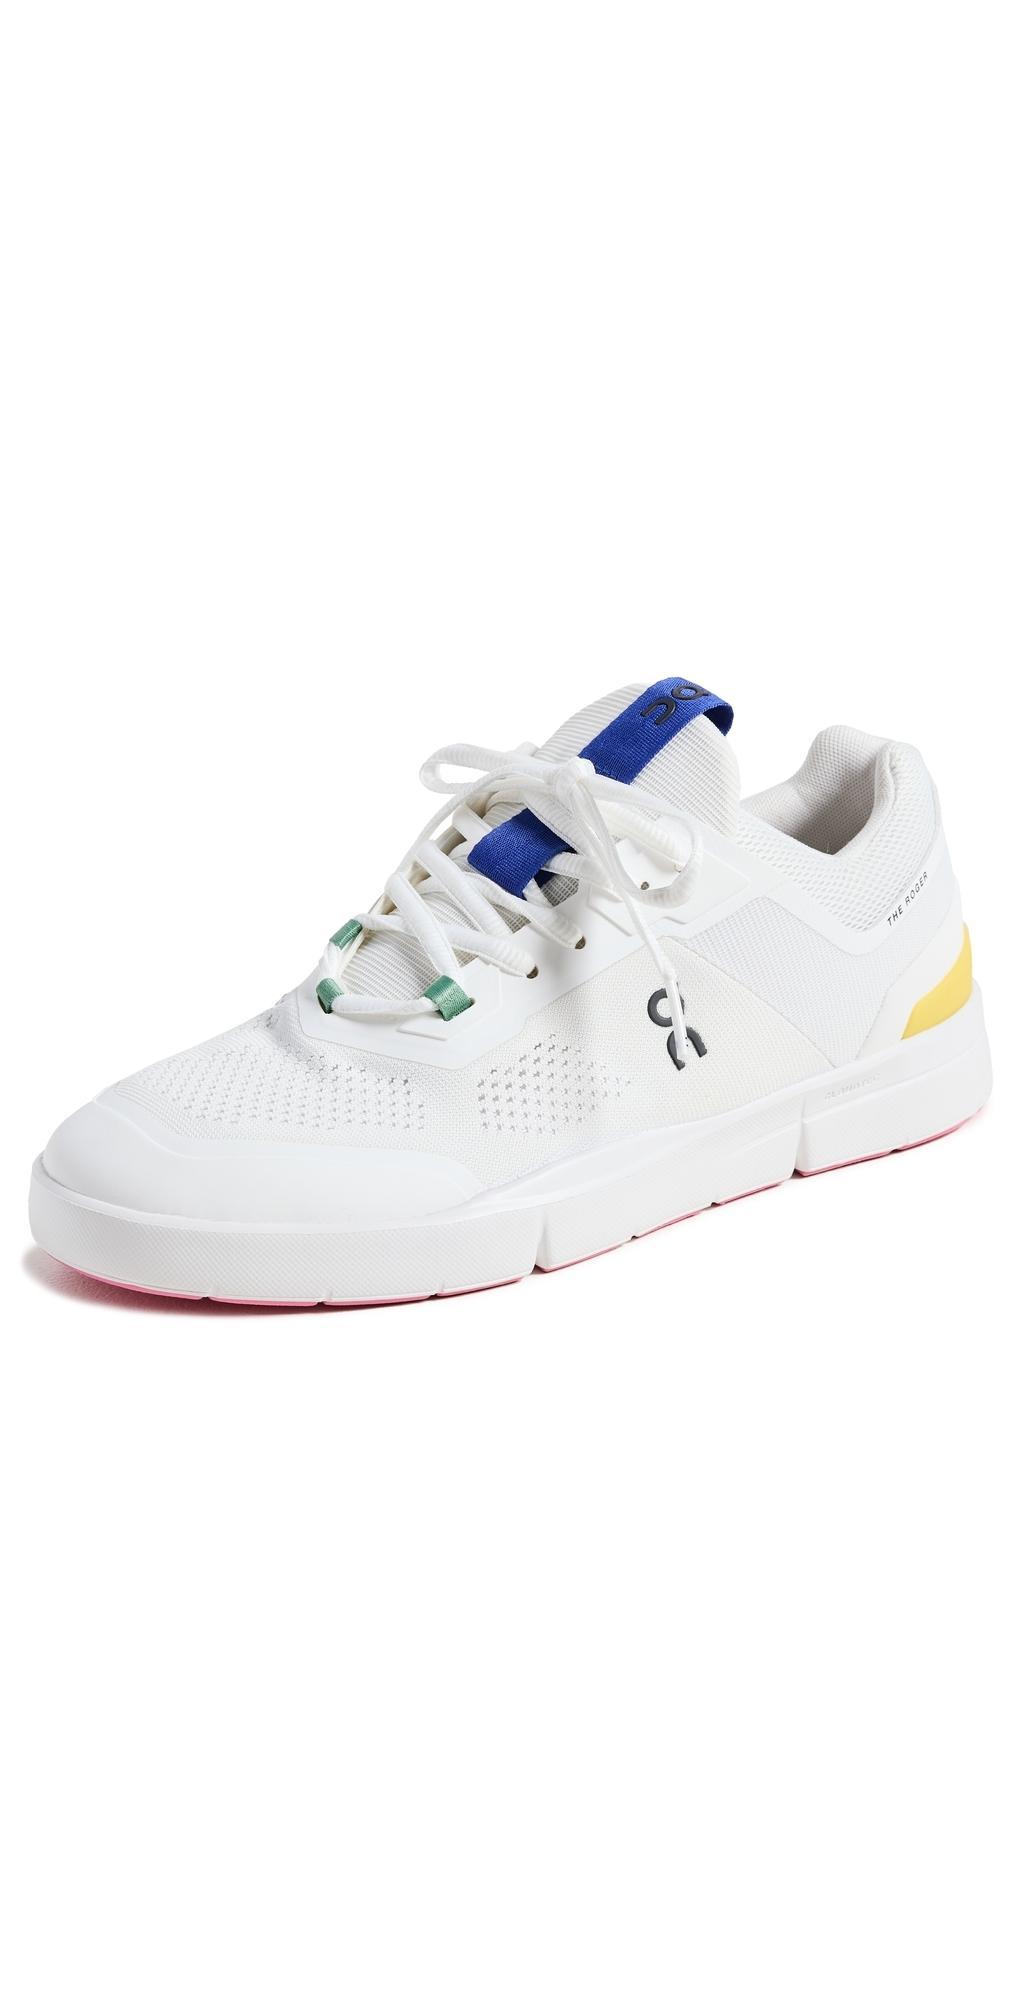 On The Roger Spin Court Sneaker Product Image